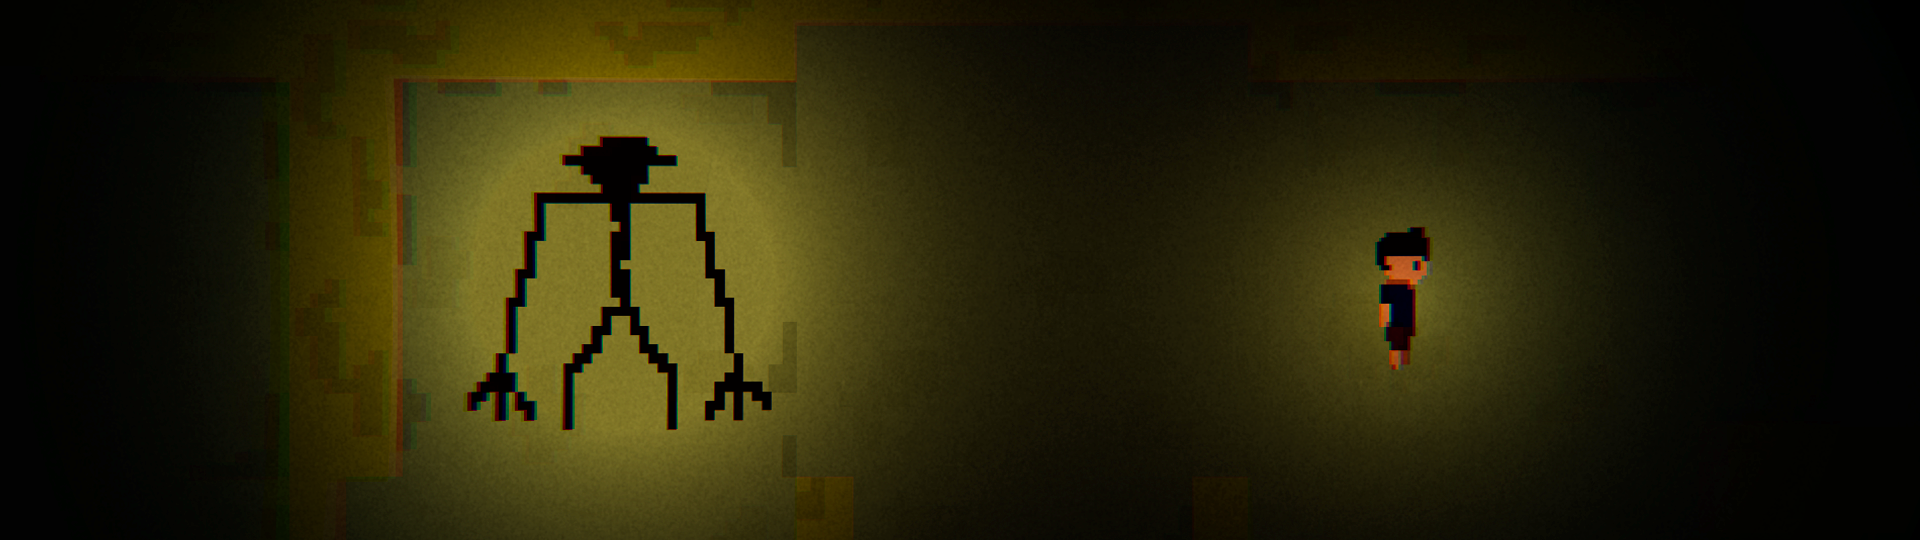 Adding the SCARIEST Entities to my Backrooms GAME 